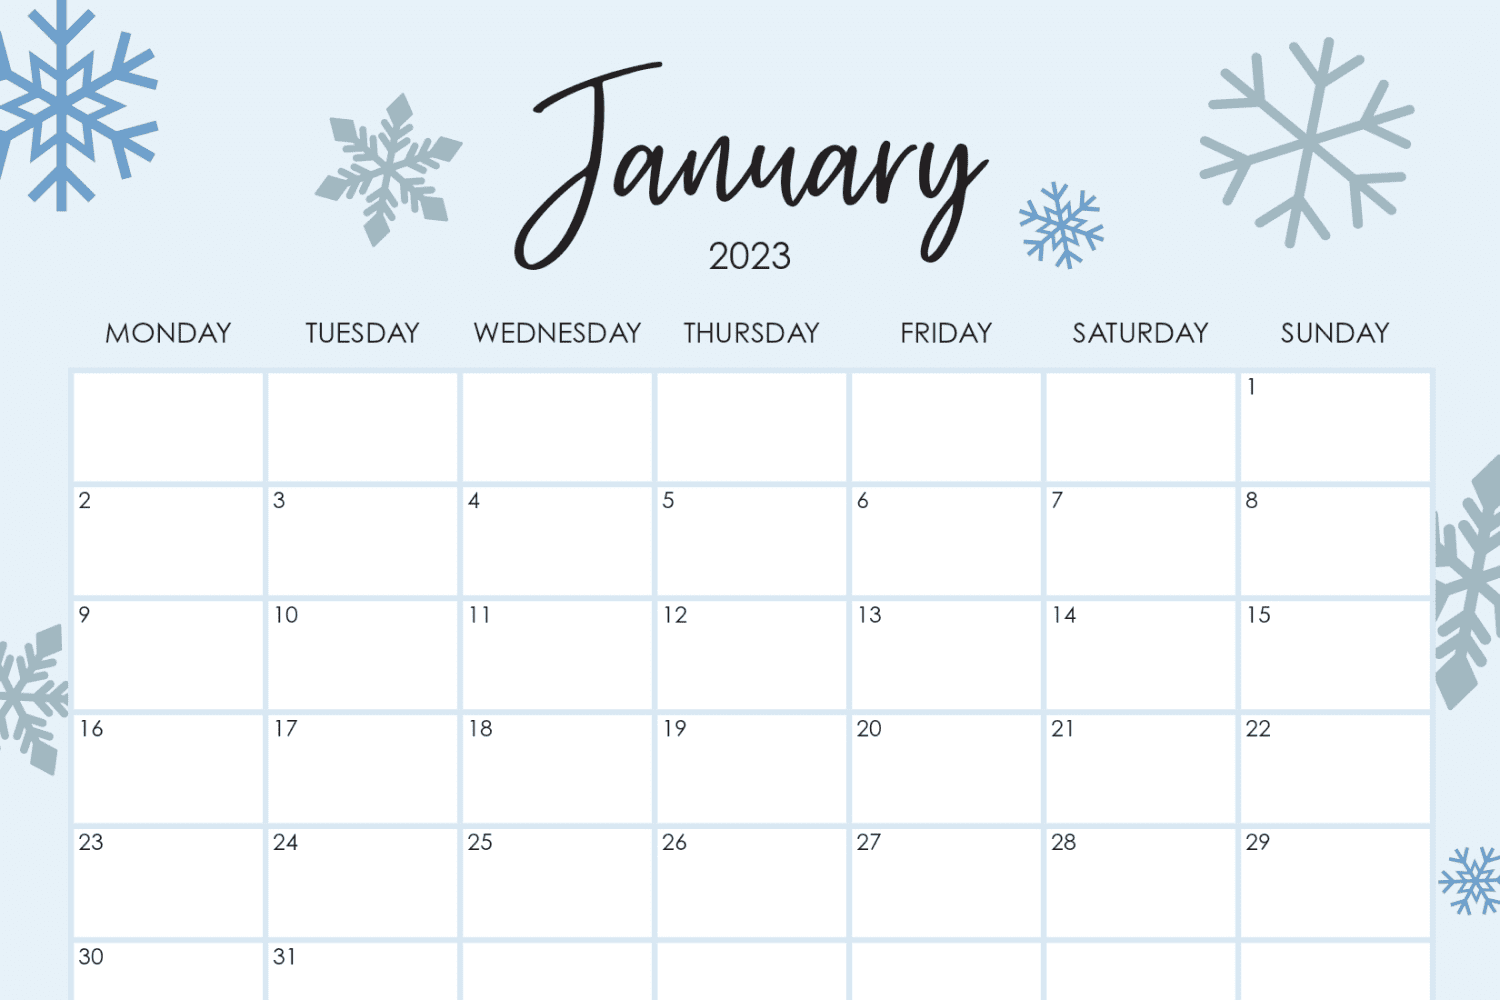 Calendar for january with snowflakes and place for notes.